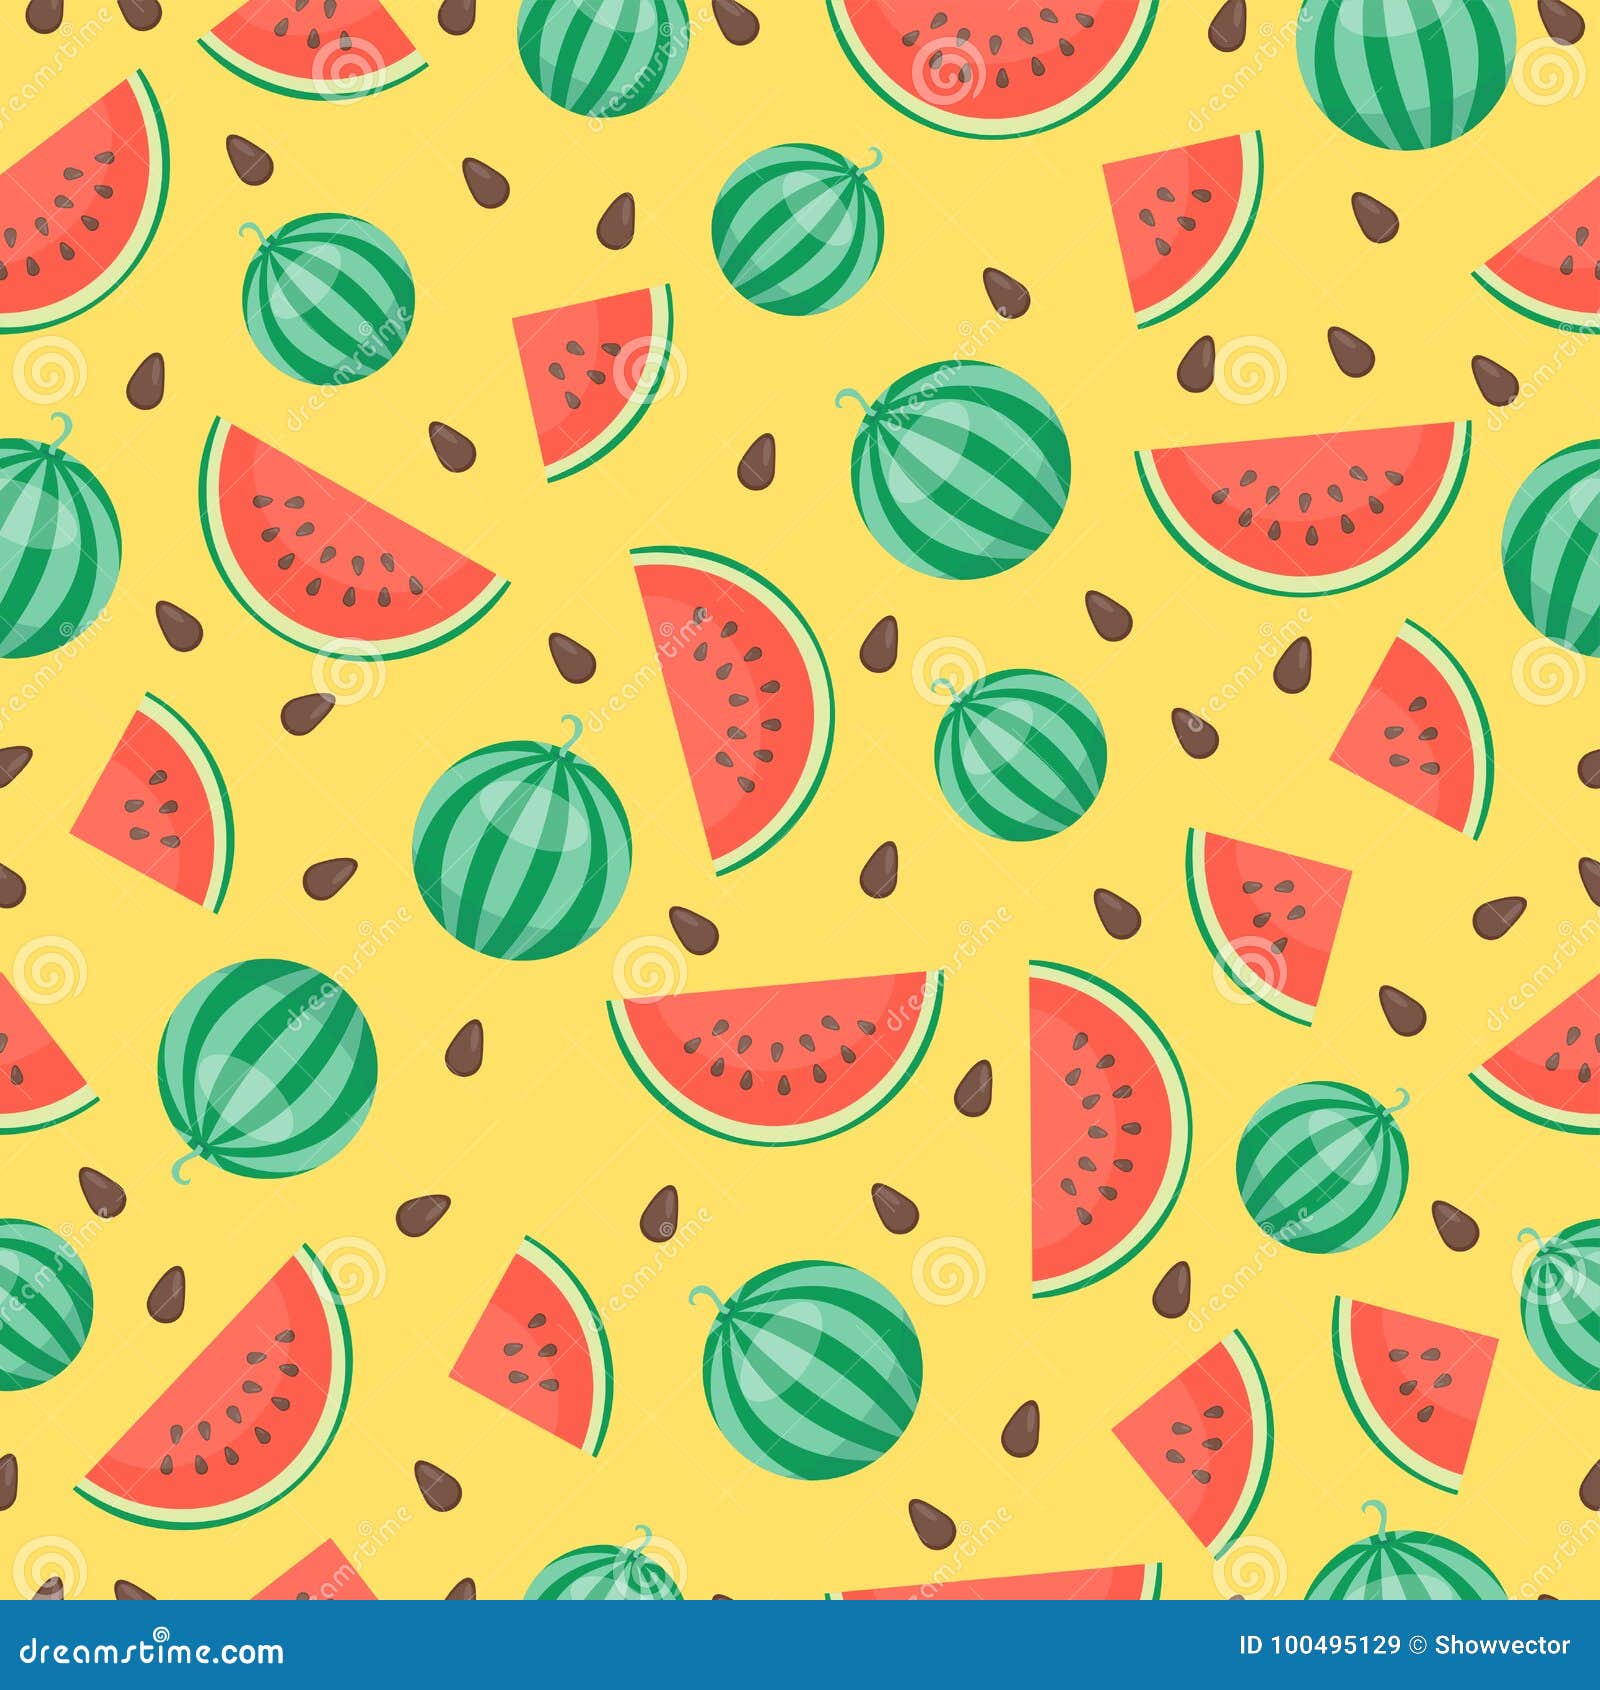 Wallpaper Vector summer background with slice of watermelon - PIXERS.NET.AU